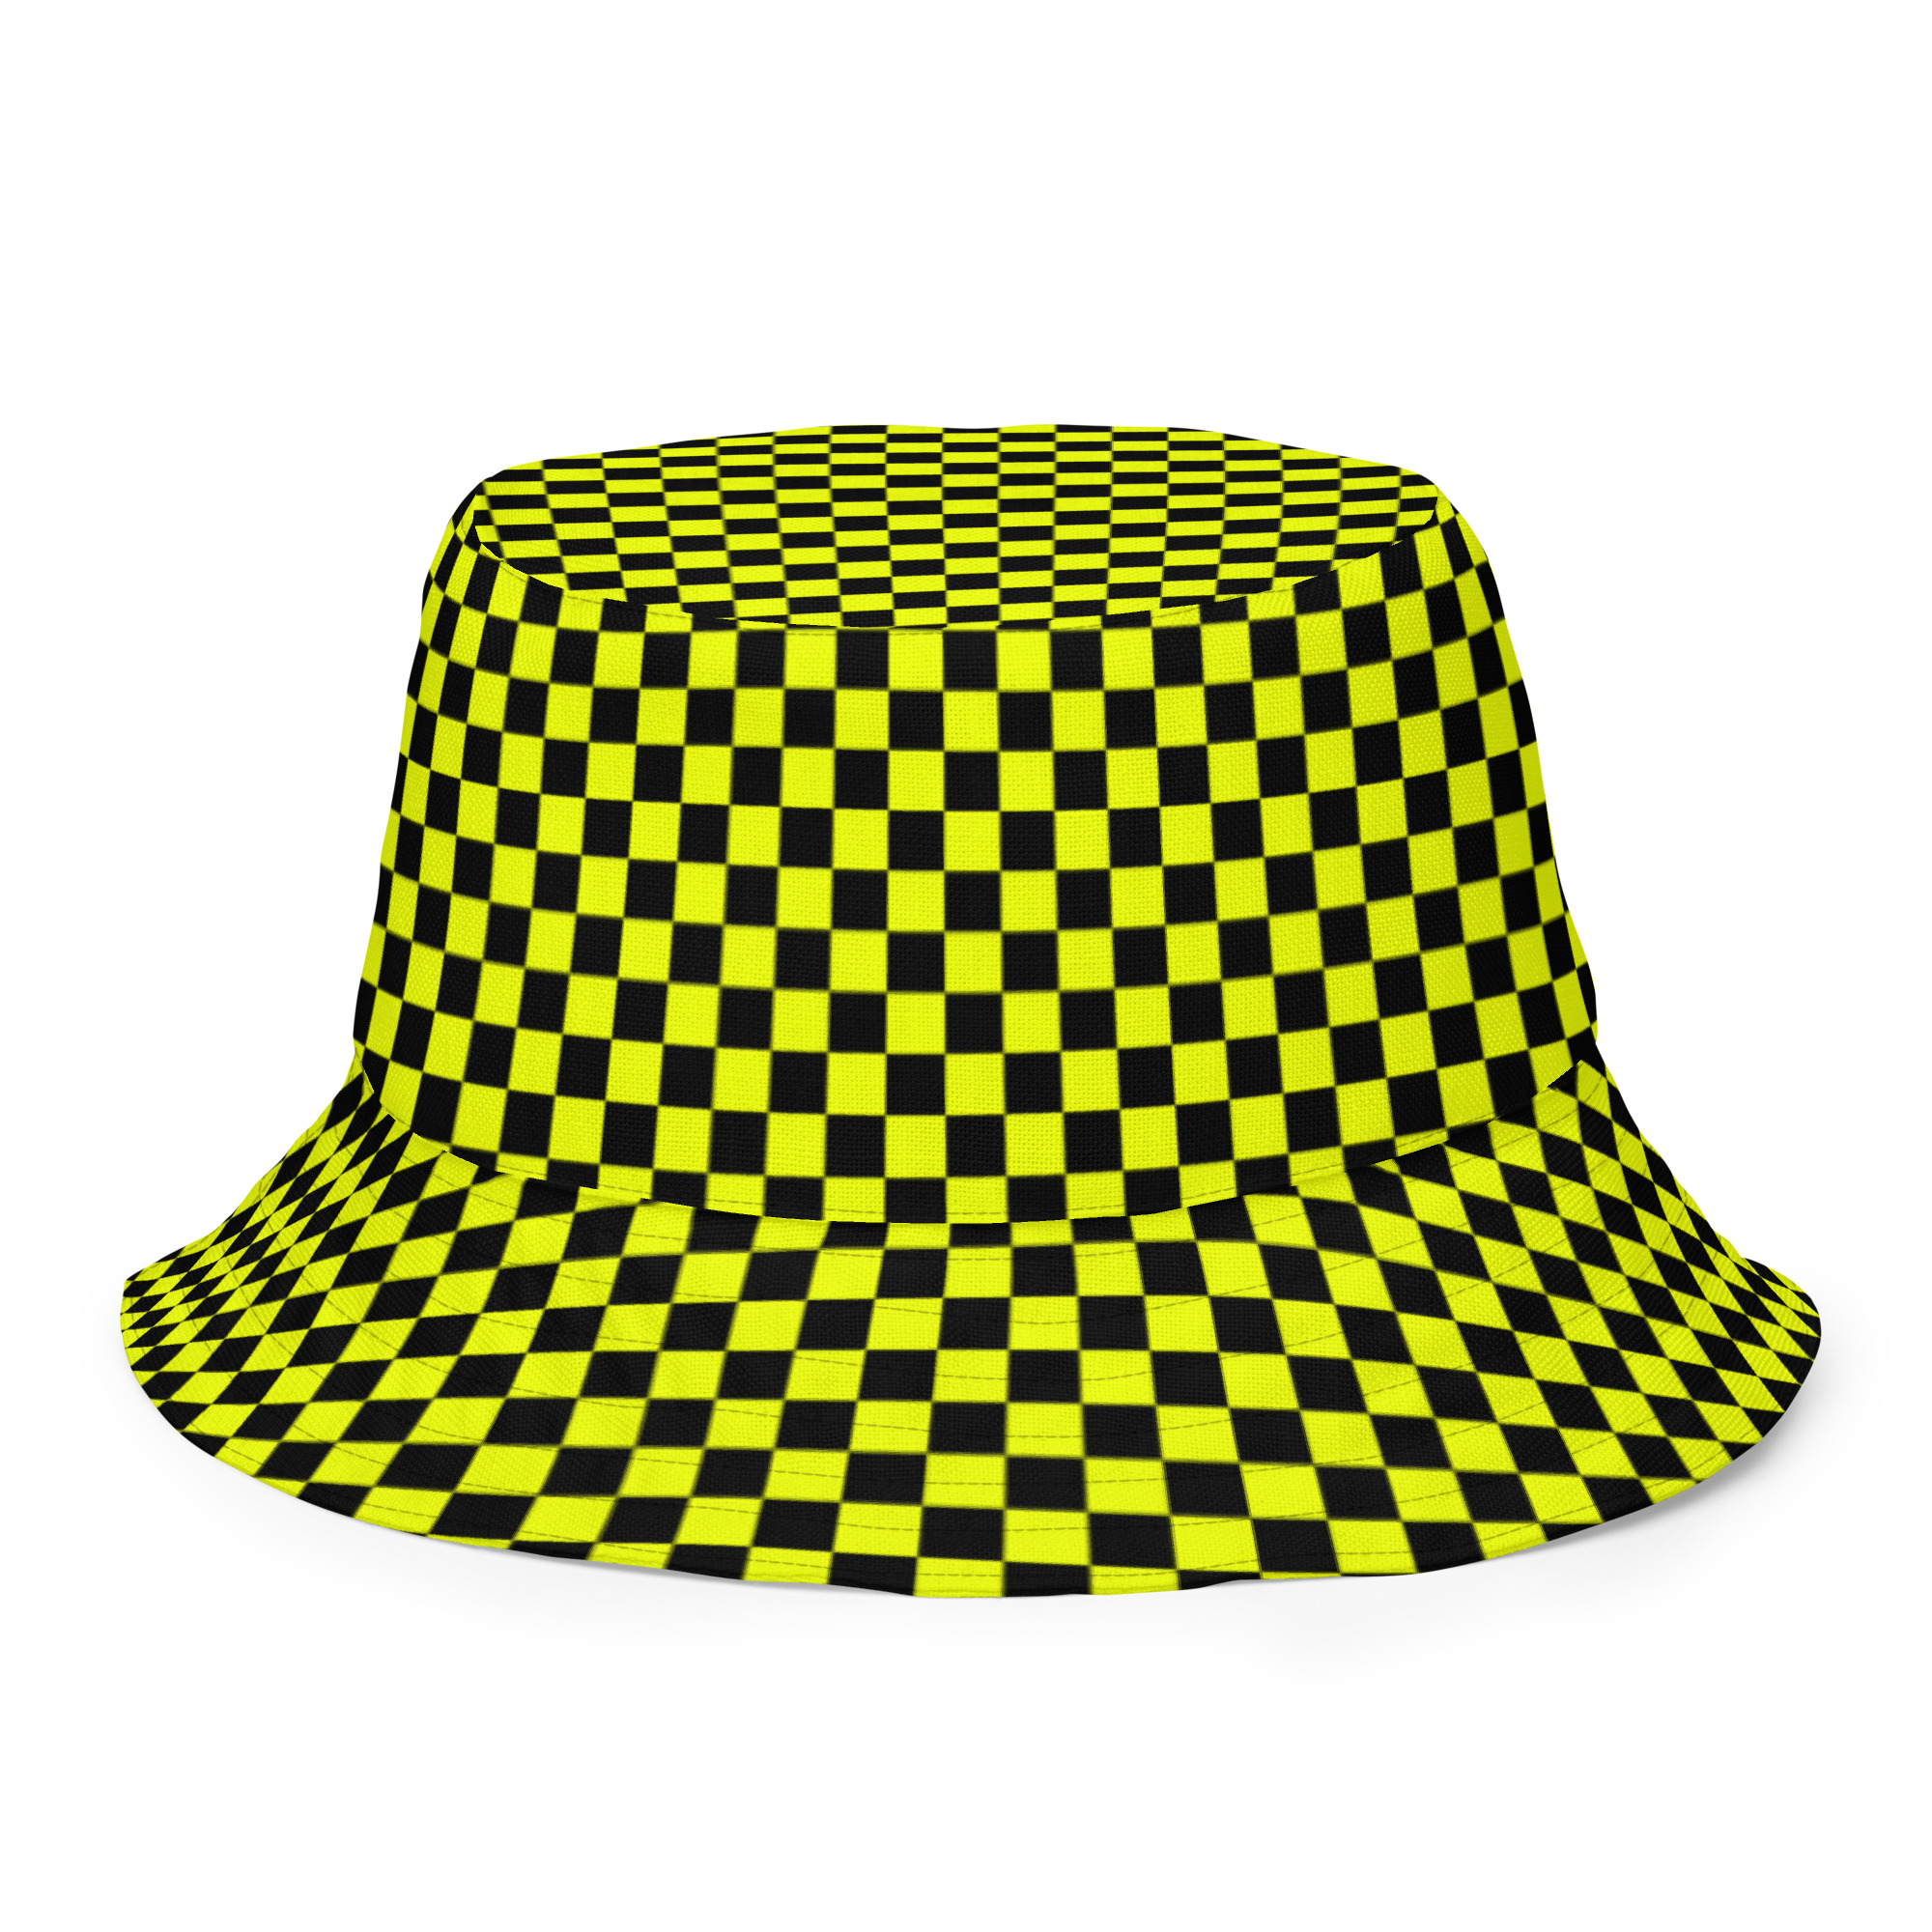 Featured image for “Bile Checker - Reversible bucket hat”